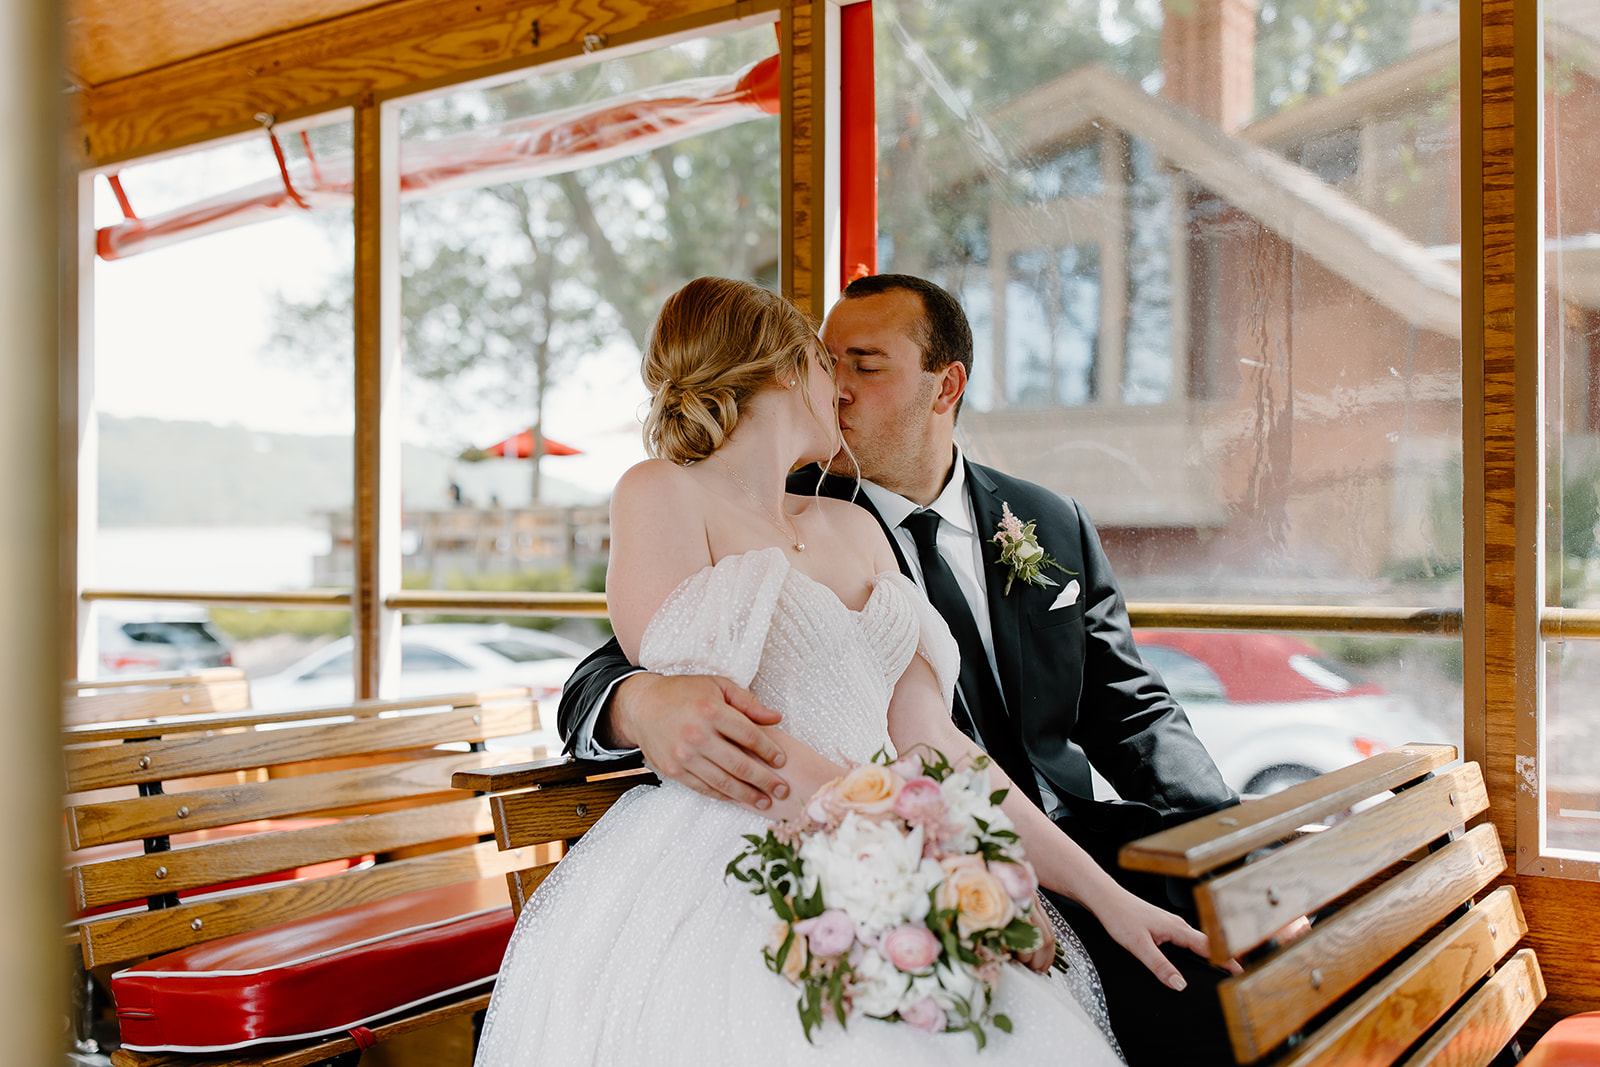 Bride and groom sharing a kiss on a trolley